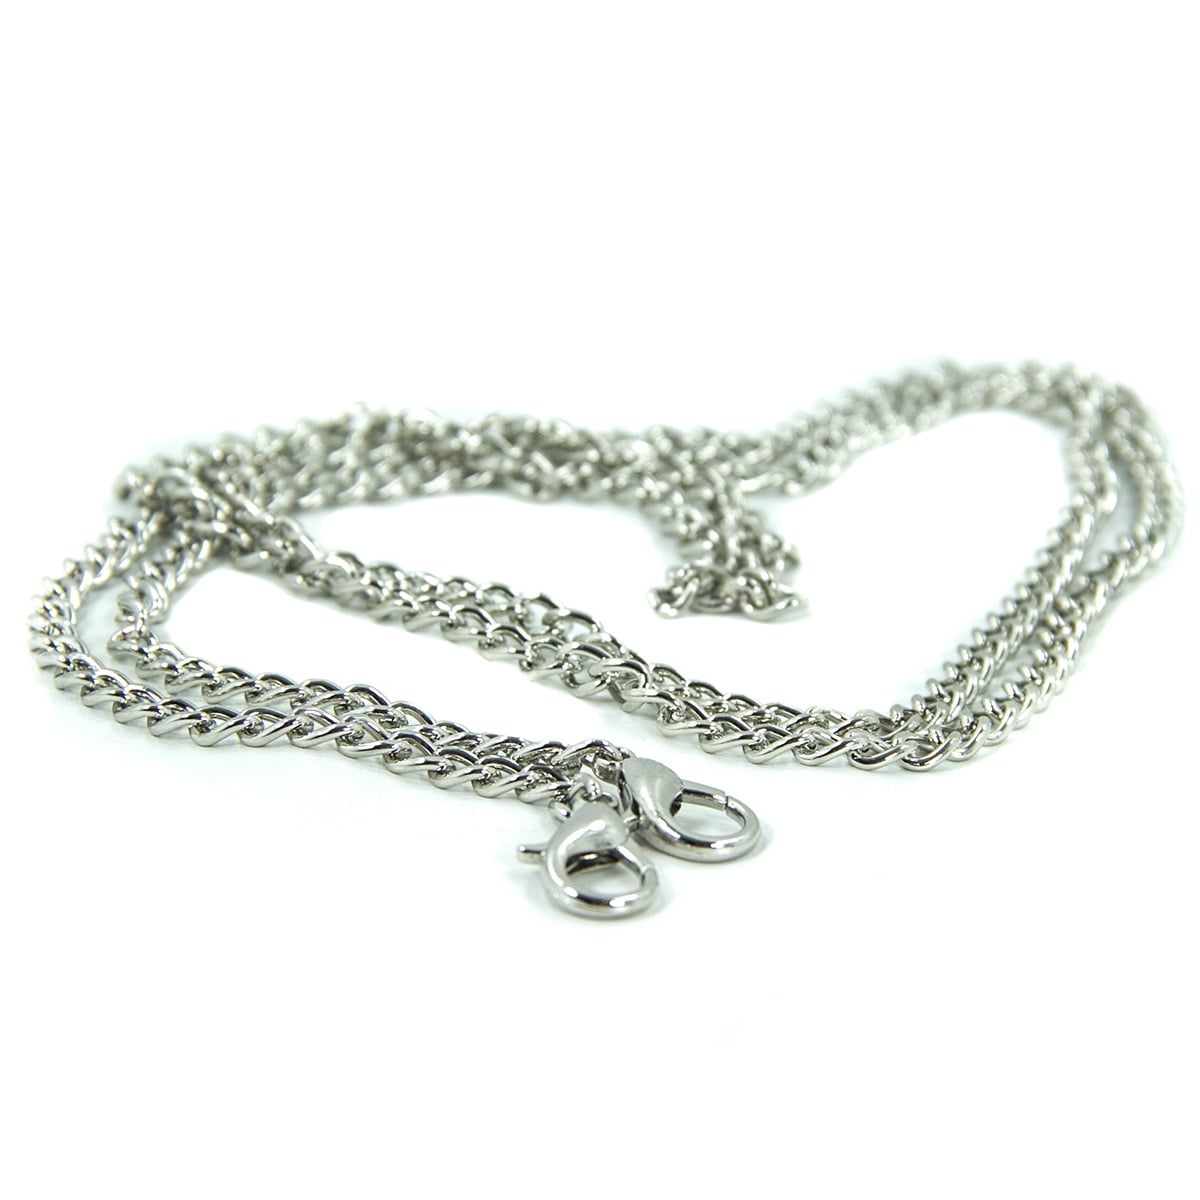 Silver Bag Chain Purse Strap Chain Cable Chains Unisex Chain Necklace,  Men's and Women's Silver Necklace Gift 